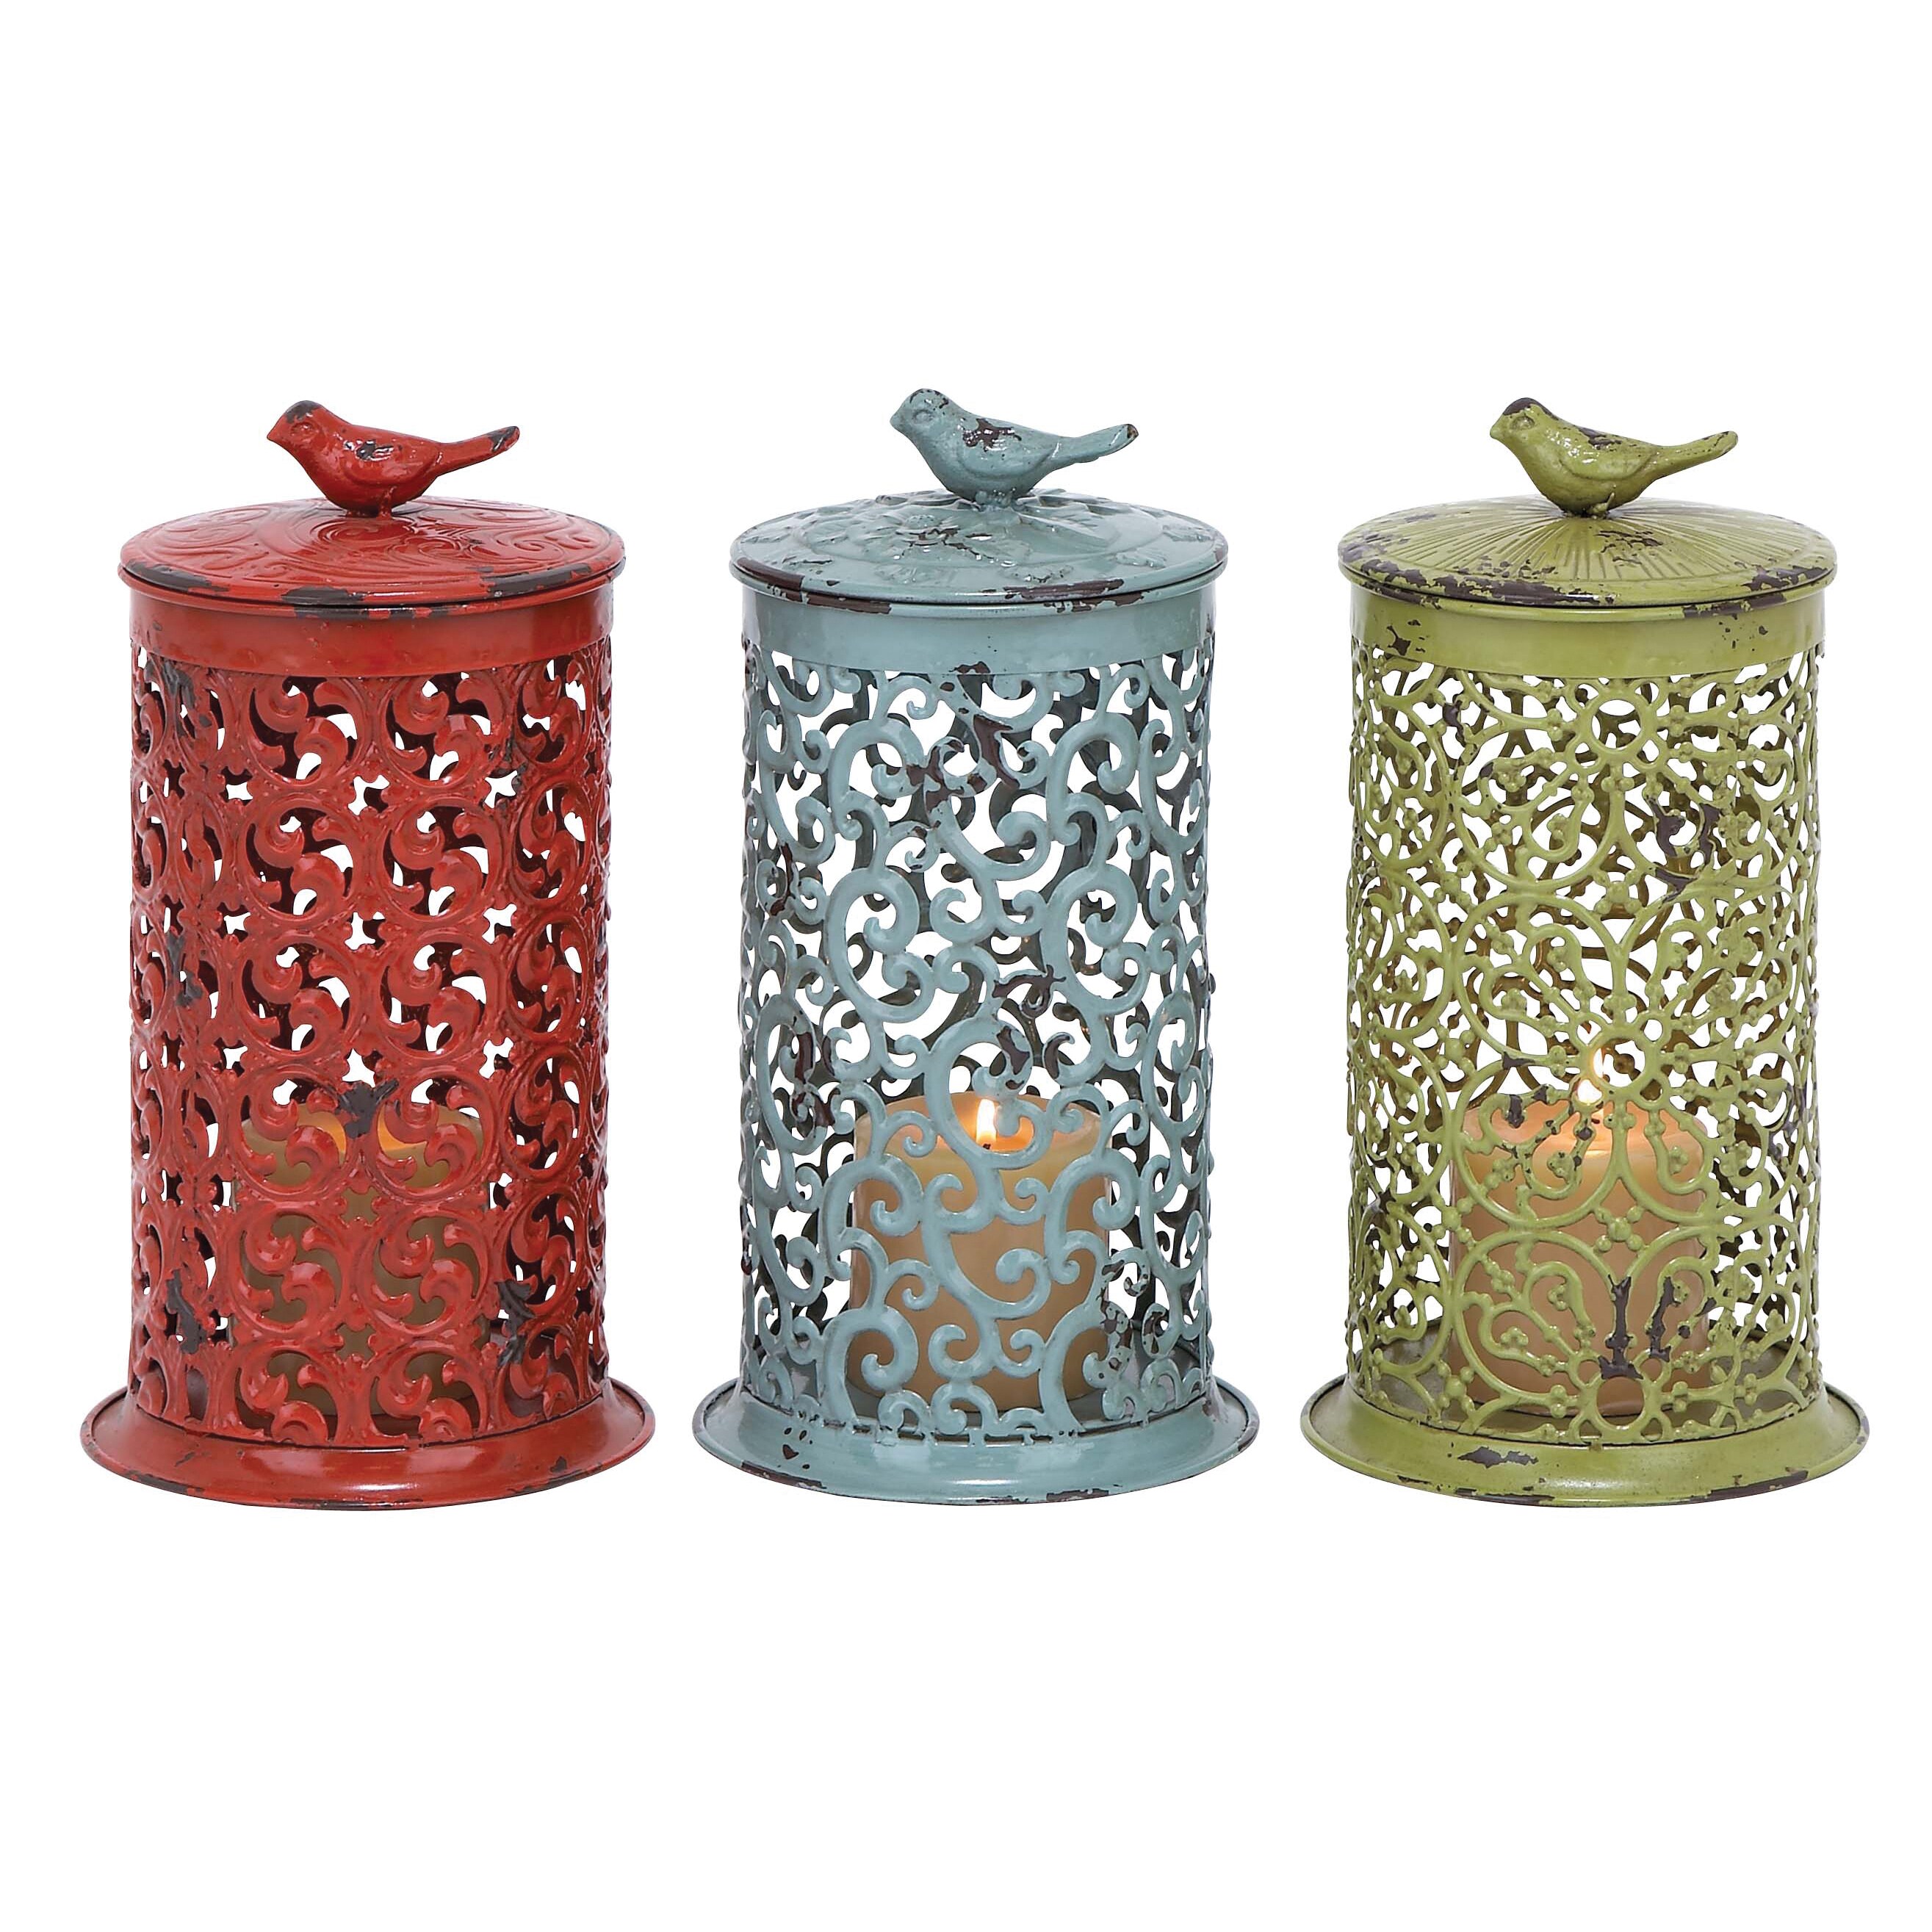 Multi colored Metal Lantern Set (set Of 3) (Red/ green/ blueRobust construction with artistic designMaterials Made of high quality metalDimensions 12 inches high x 7 inches in diameter )